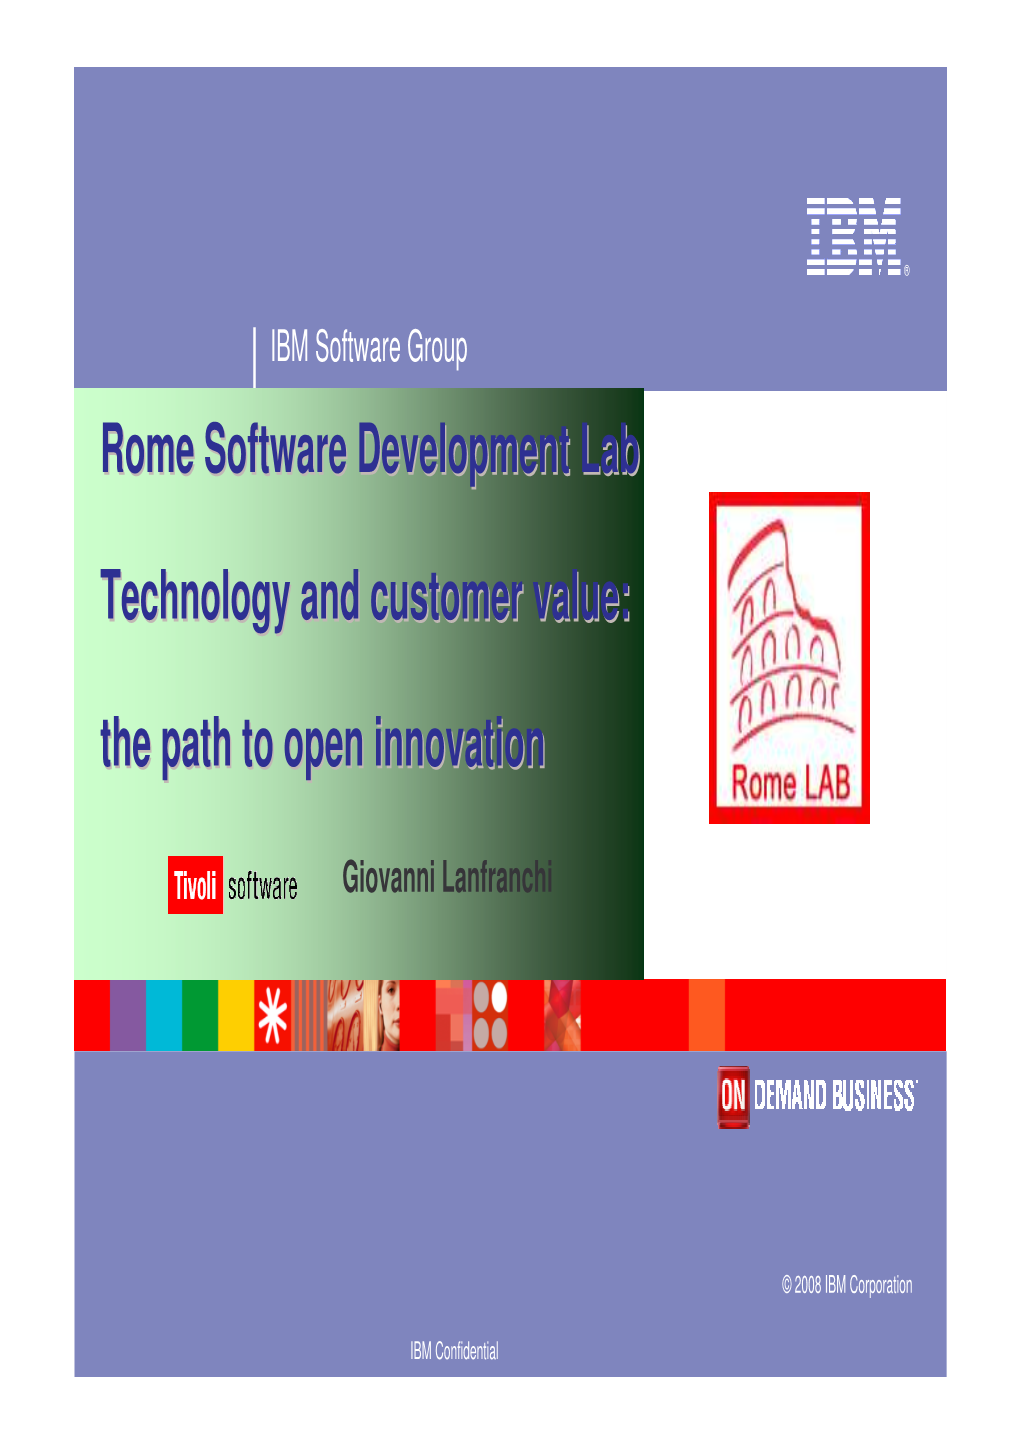 Rome Software Development Lab Technology and Customer Value